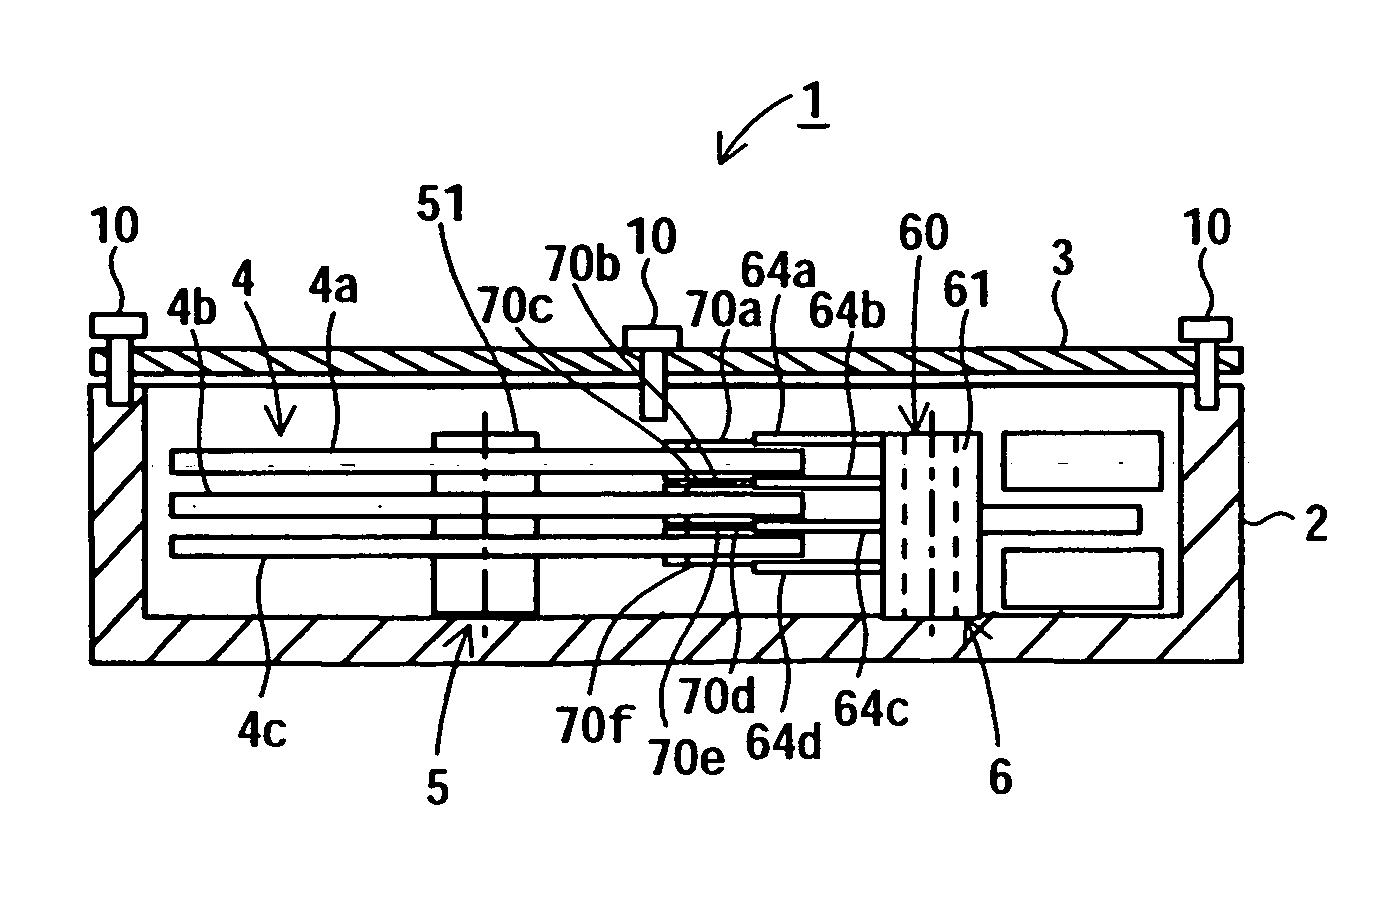 Structure to prevent deformation of magnetic disk device housing